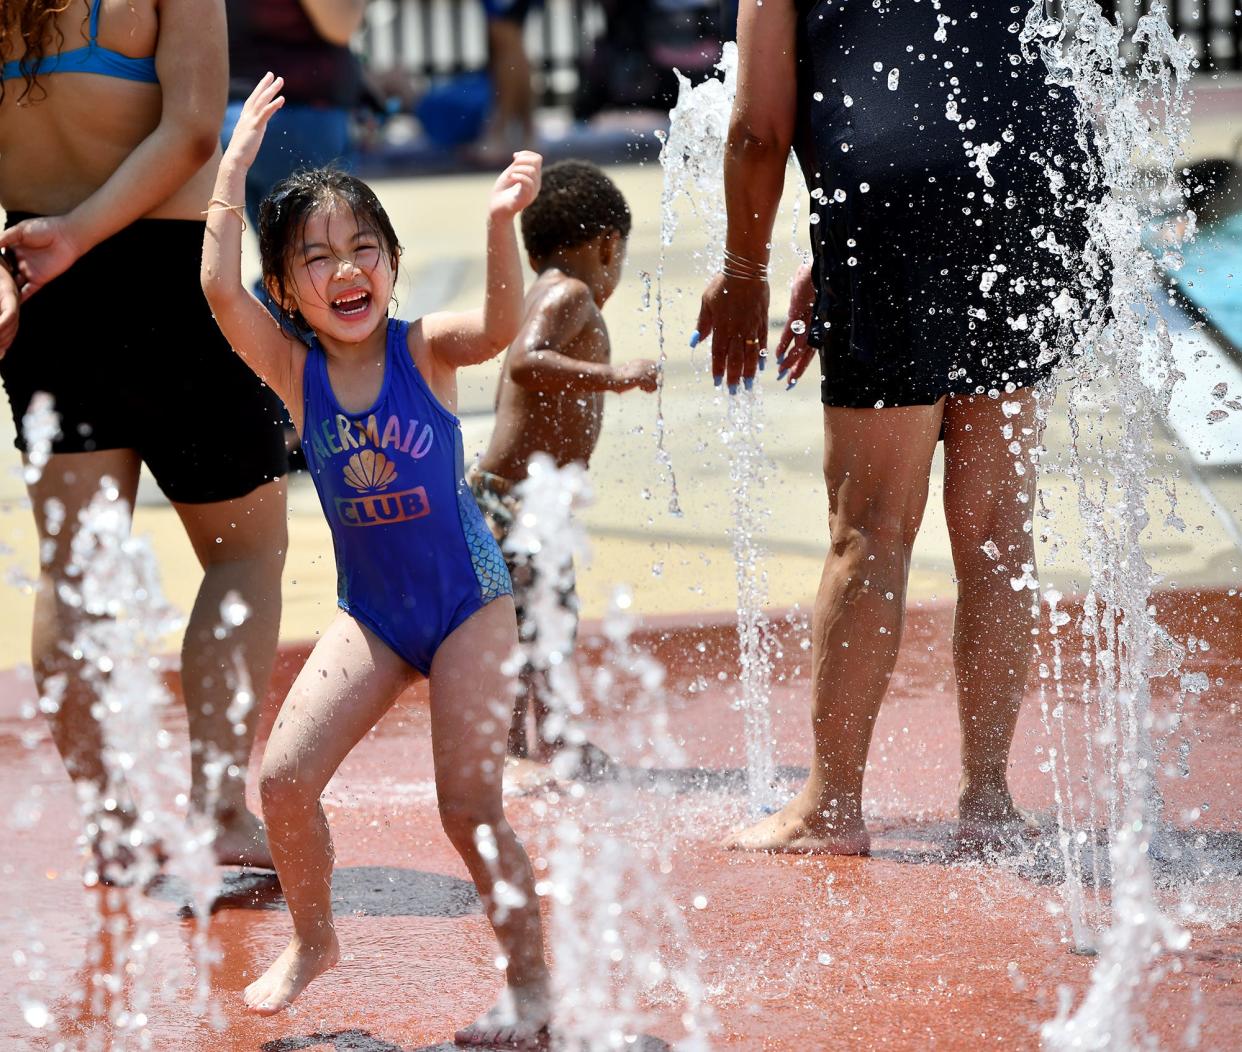 With temperatures soaring into the 80s, the city's pools, spray parks and beaches opened at just the right time, Friday including the Crompton Park Pool where Baylee Quach, 5, revels in the fountain water.